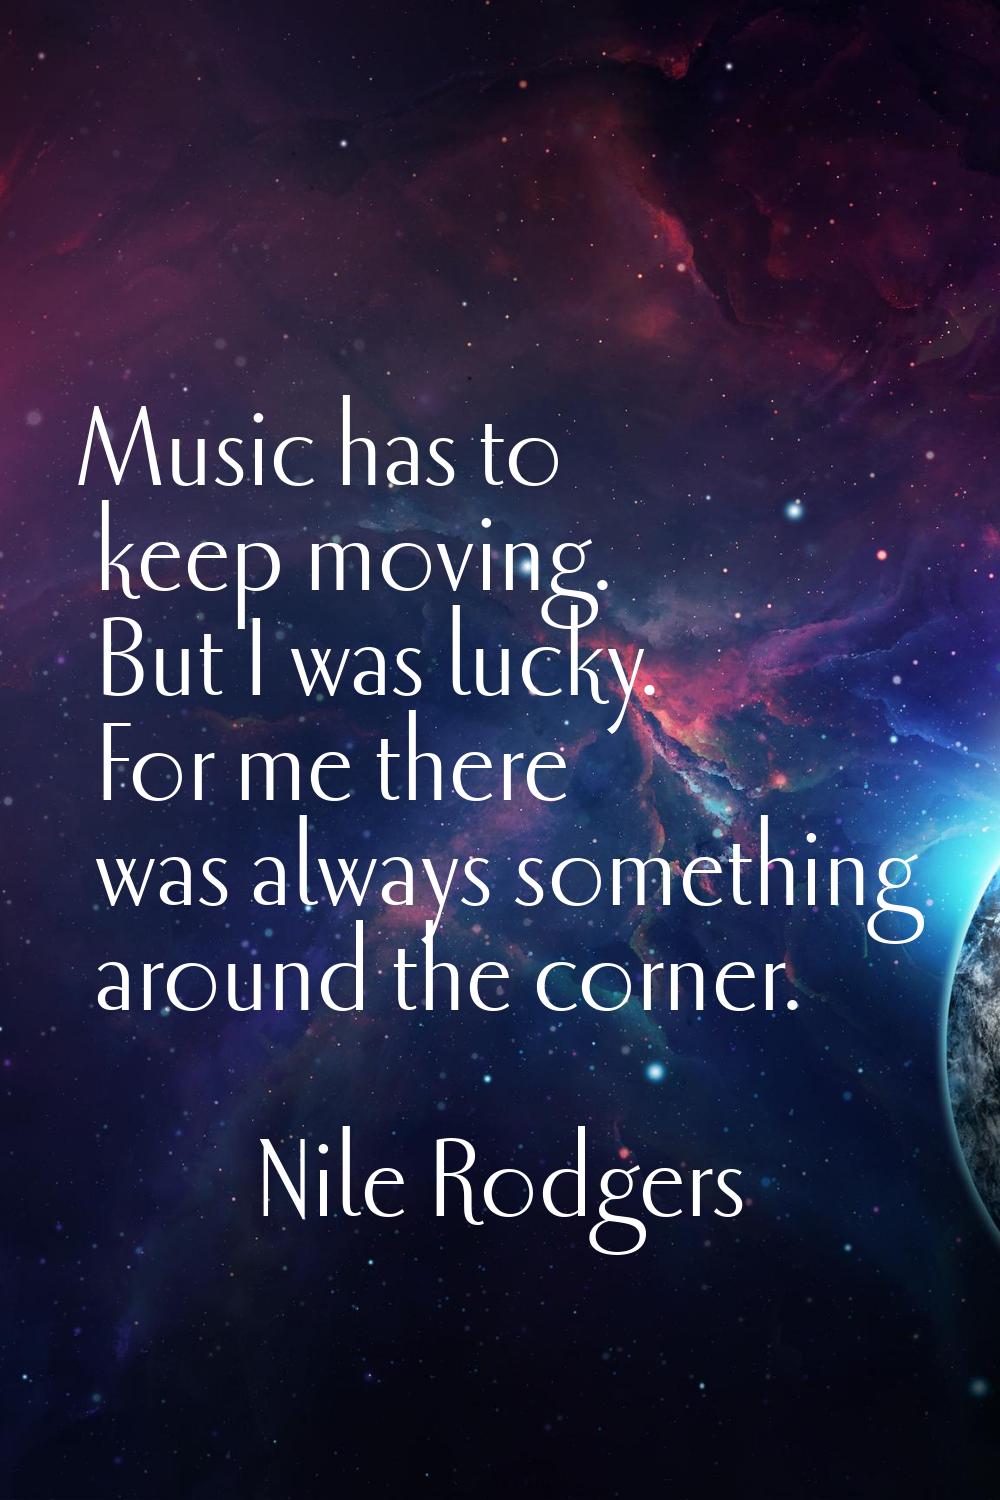 Music has to keep moving. But I was lucky. For me there was always something around the corner.